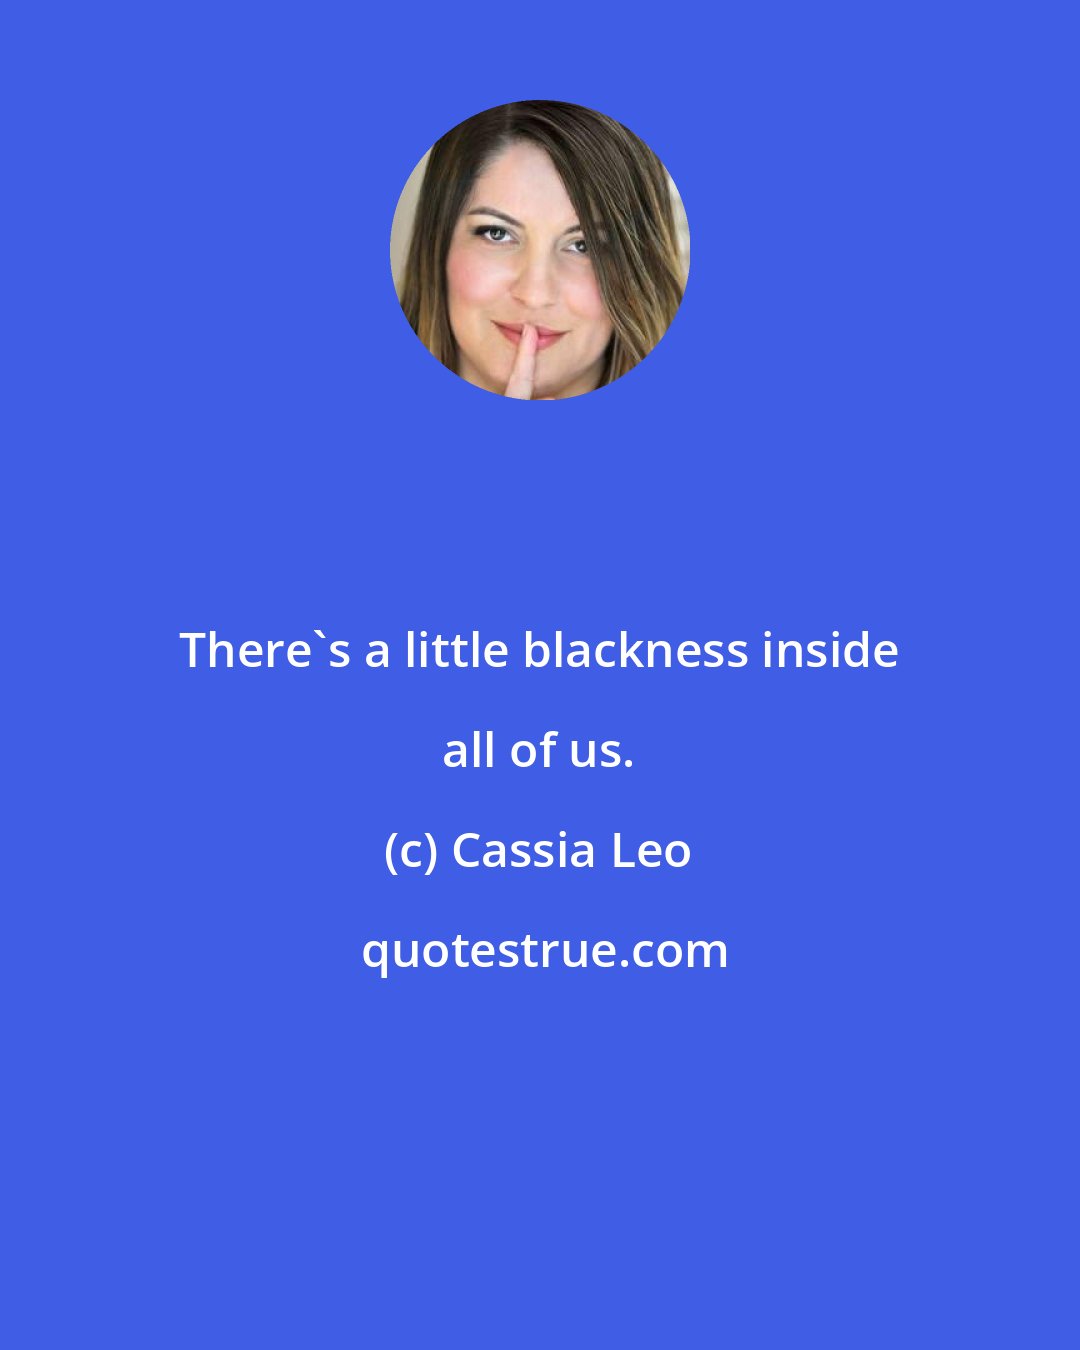 Cassia Leo: There's a little blackness inside all of us.